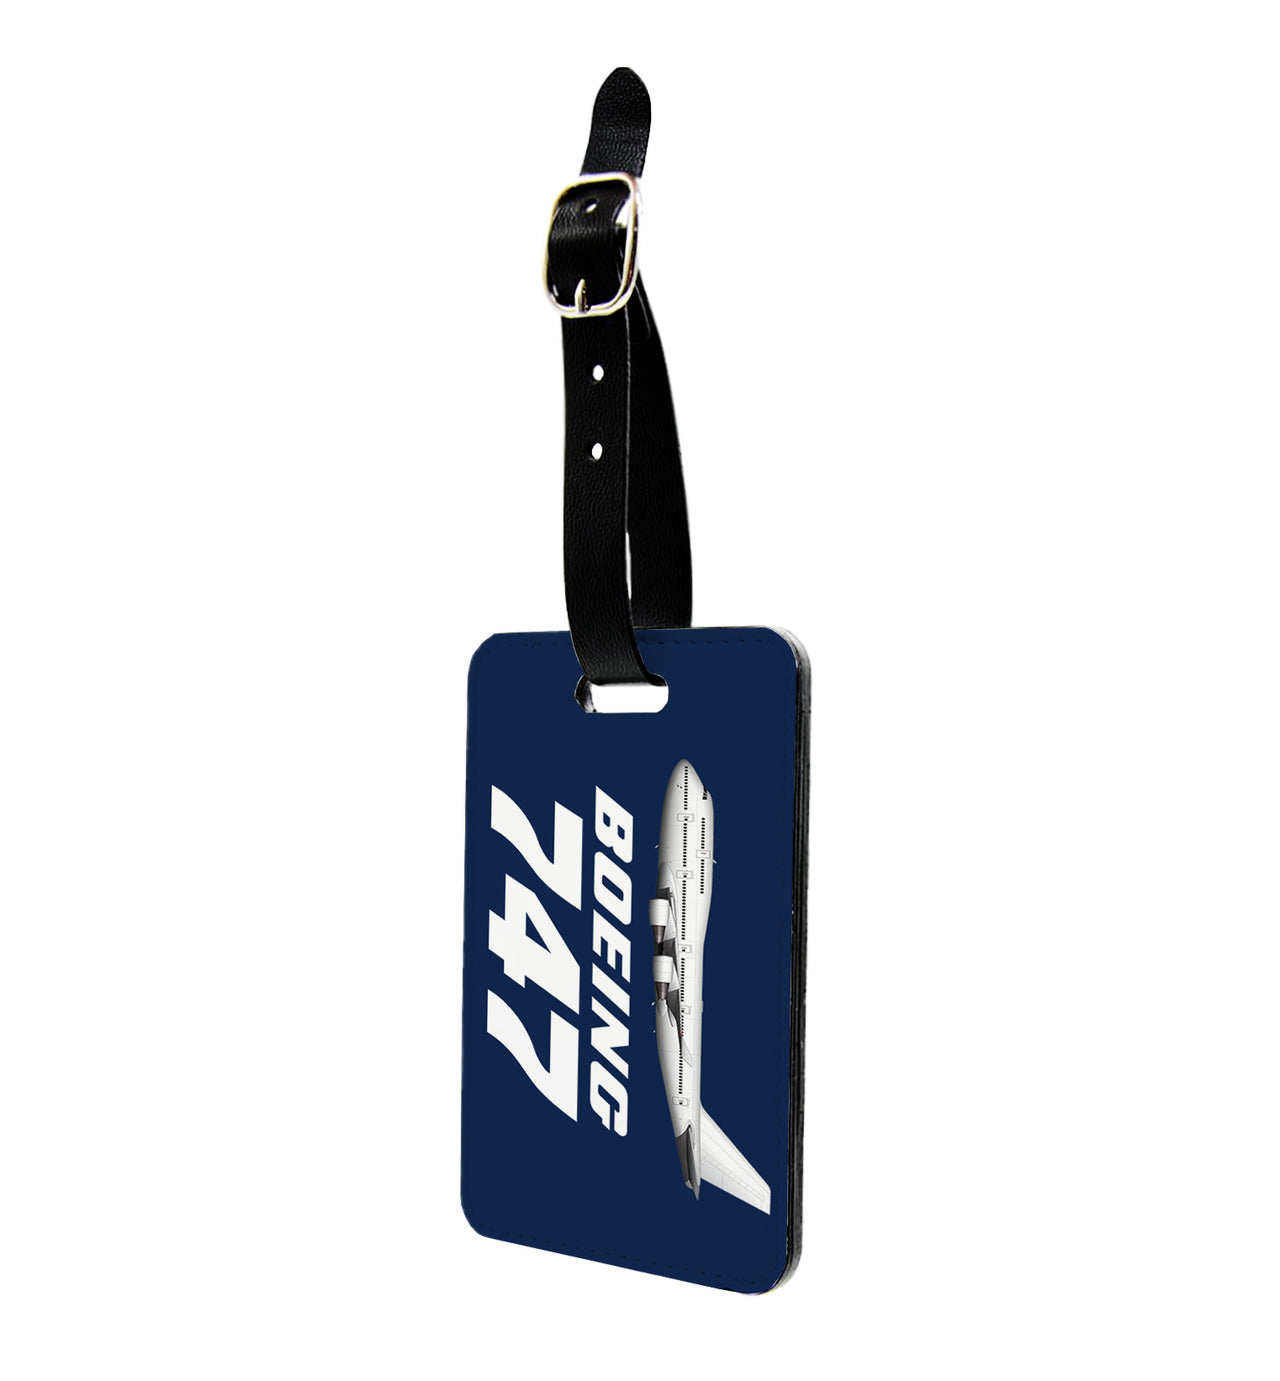 The Boeing 747 Designed Luggage Tag